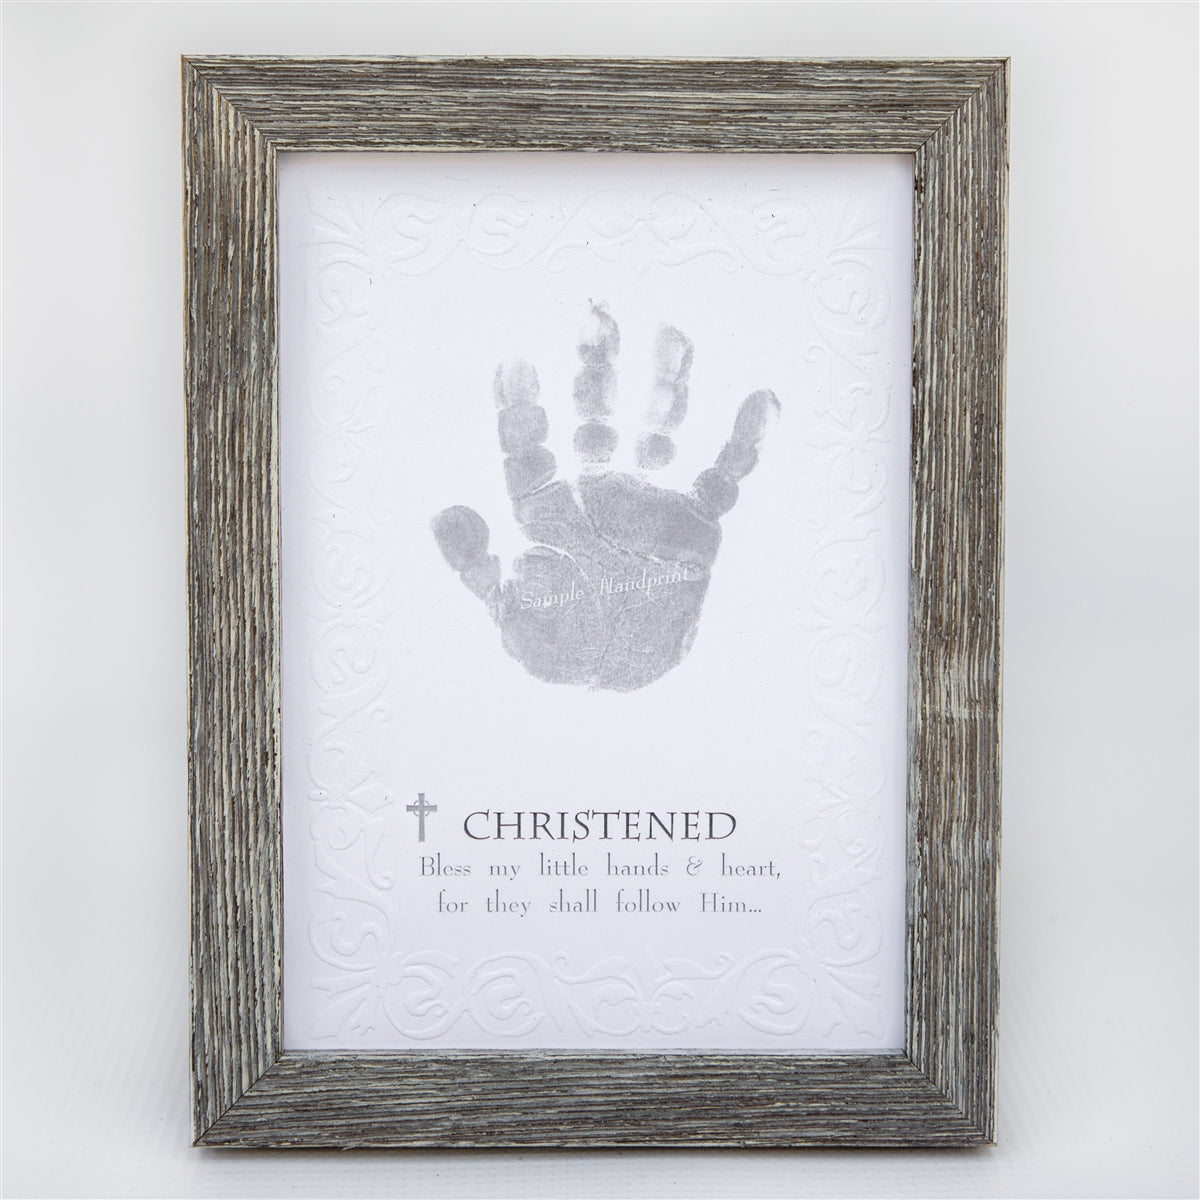 5x7 farmhouse frame with &quot;Christened&quot; Sentiment on embossed cardstock with space for a child&#39;s handprint.